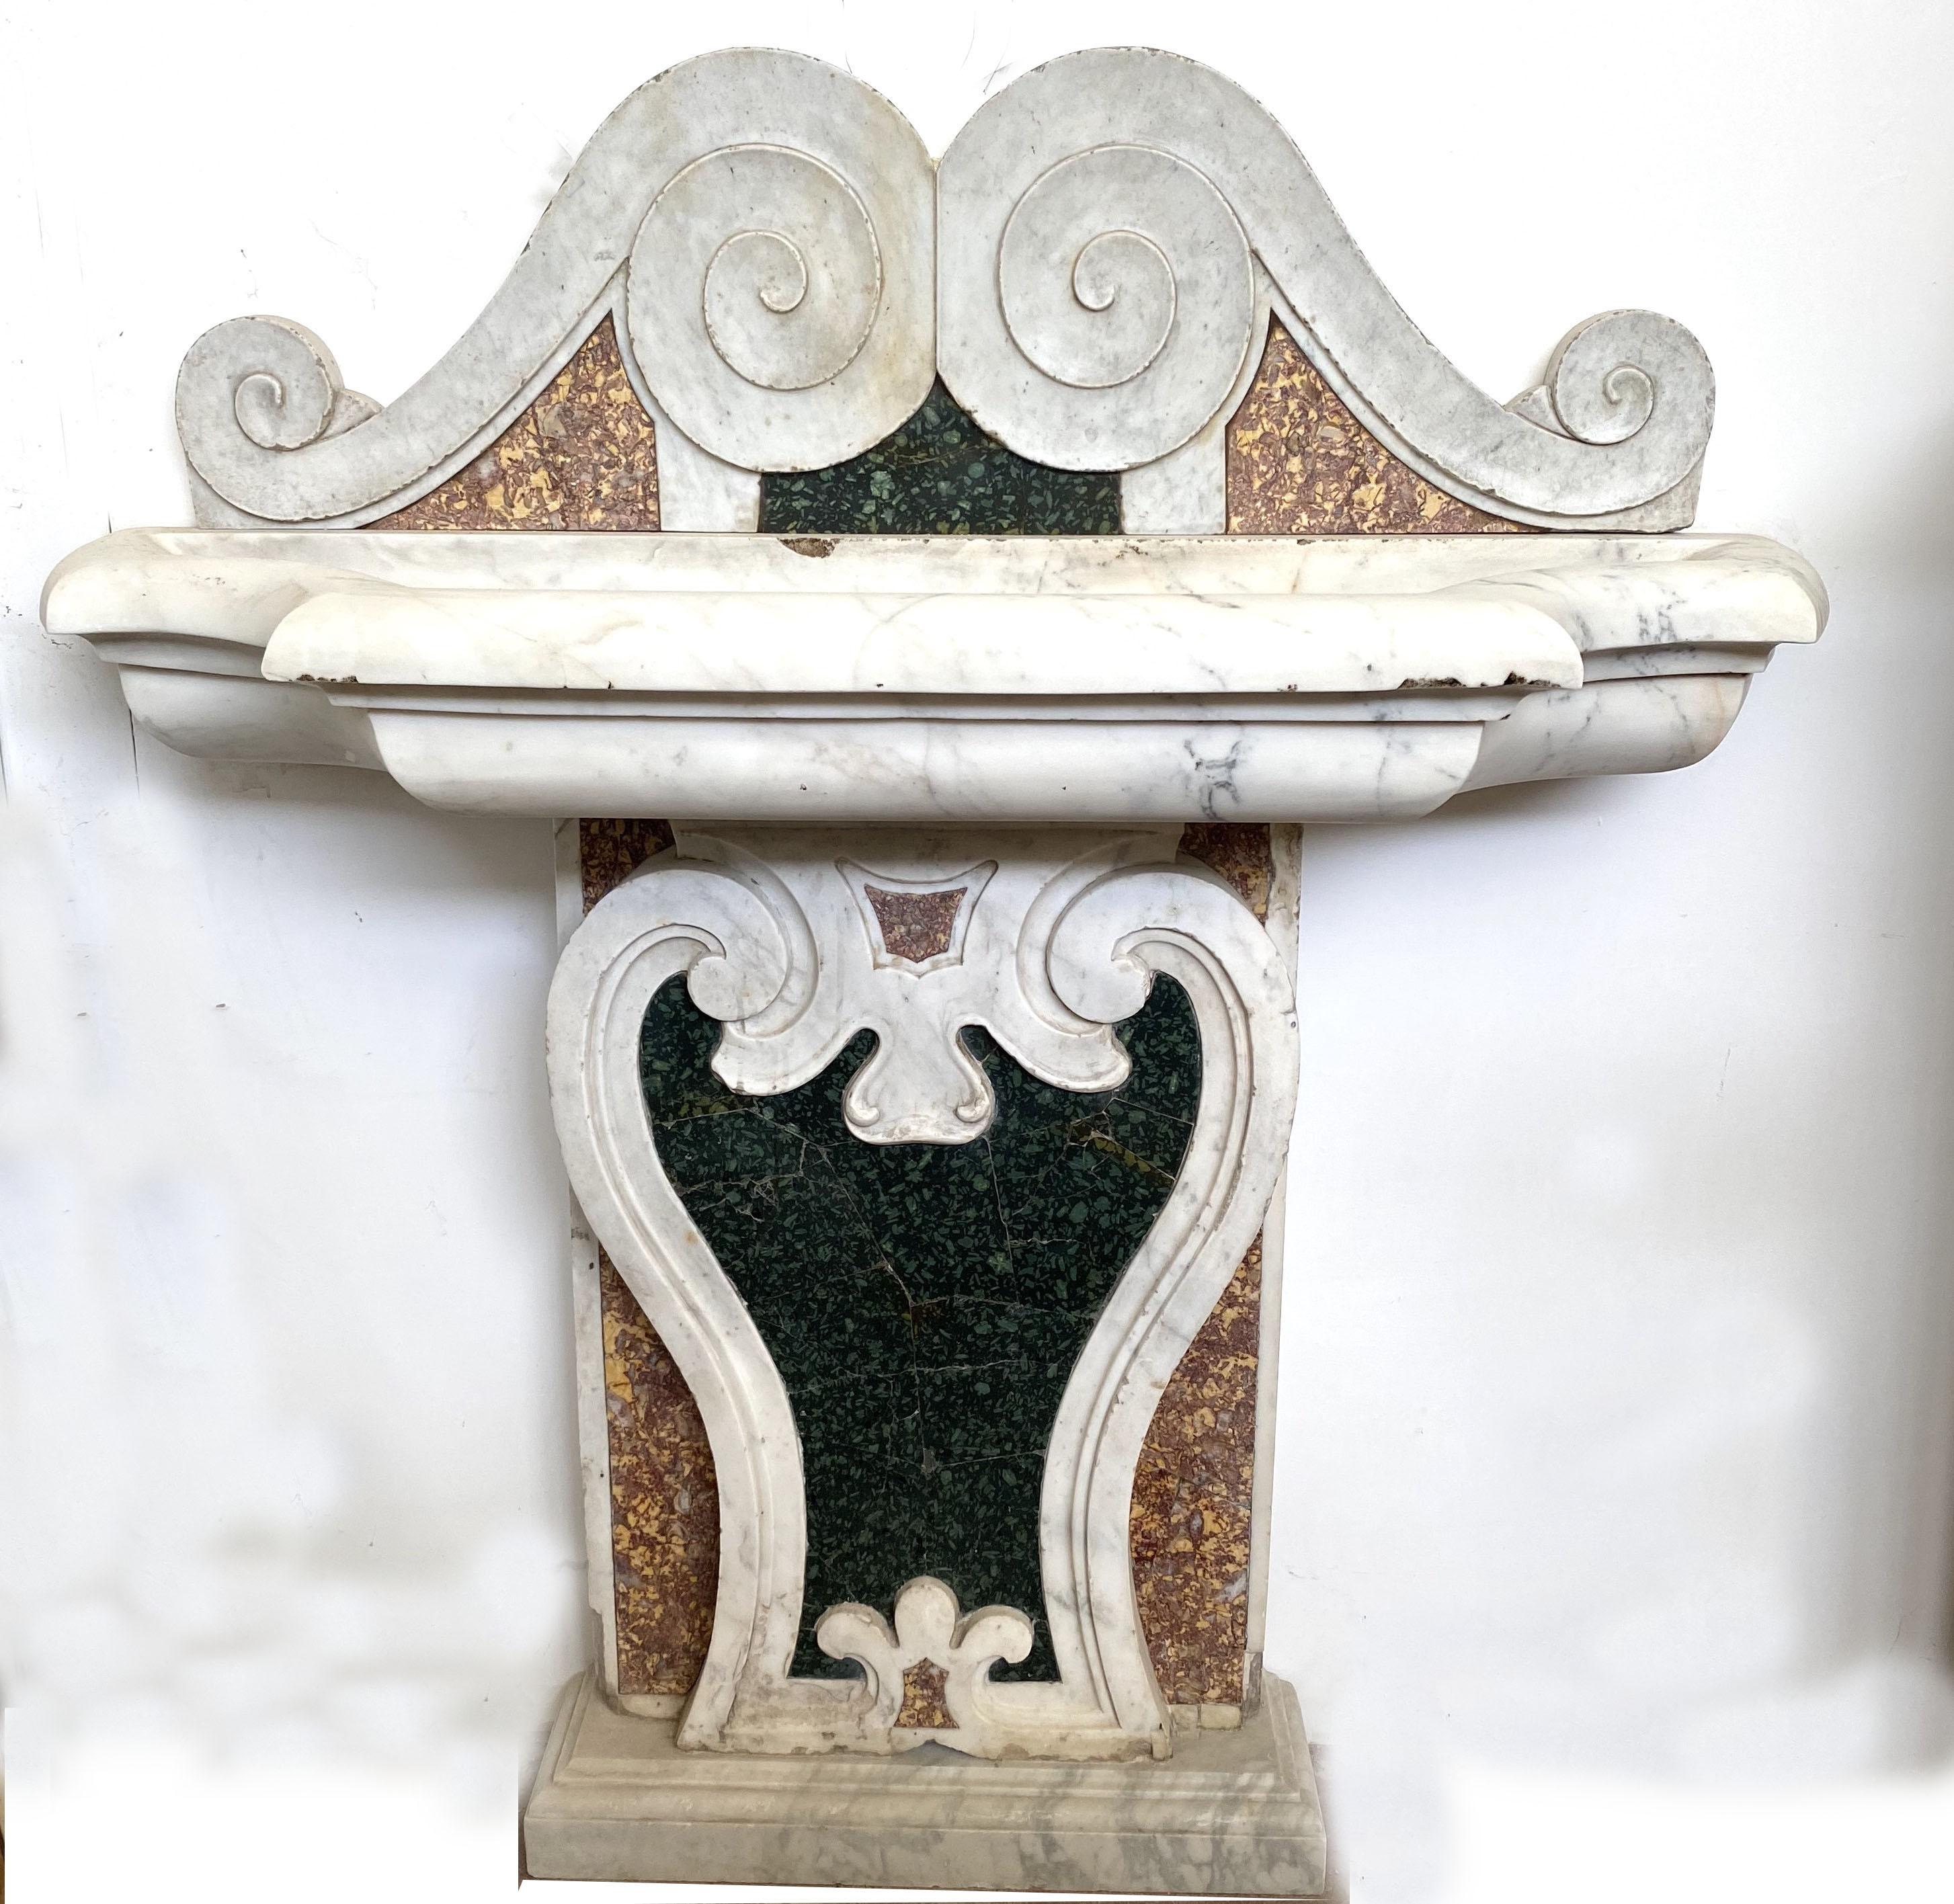 Fabulous Italian 17th century Baroque marble fountain with Serpentine green, white Carrara and Brocatello di Spagna marbles inlays.

Three piece set composed of a base, front and shaped White marble vasca to be placed on a wall.

We can arrange